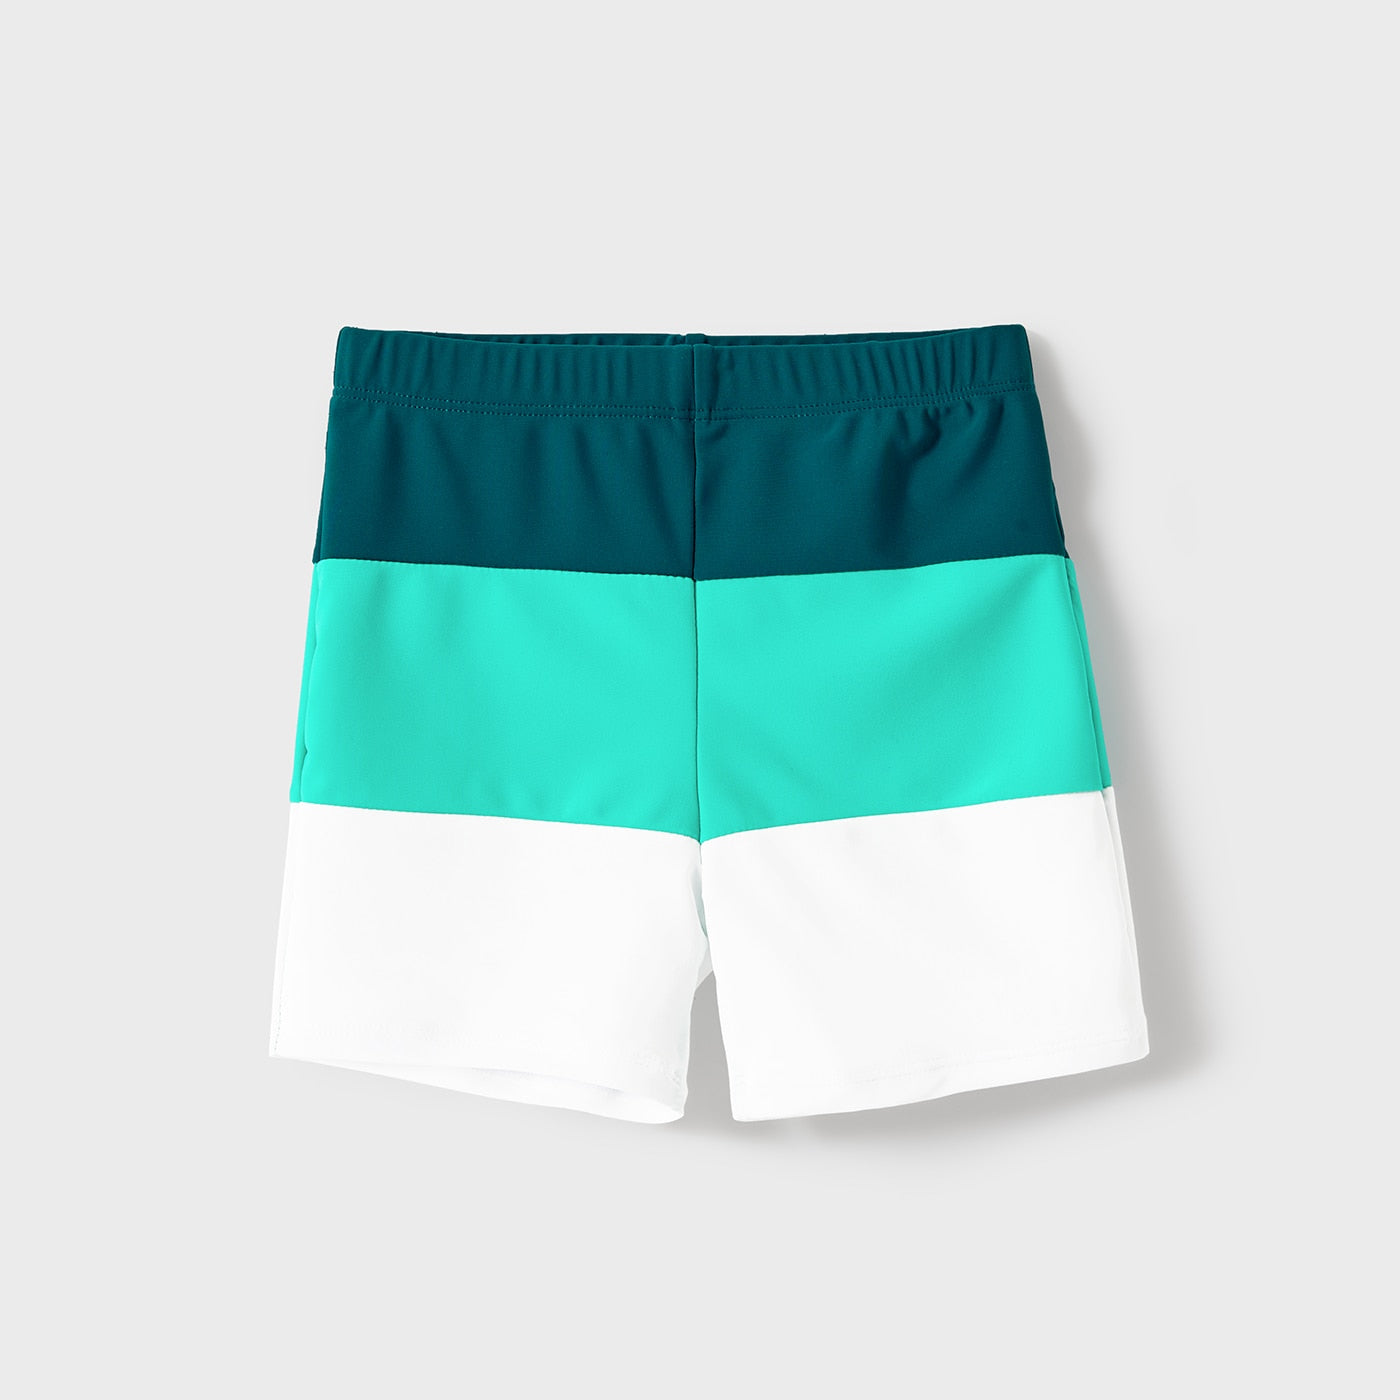 Family Matching Swimsuit Colorblock One-piece Bathing Suit or Swim Trunks Shorts - ChildAngle